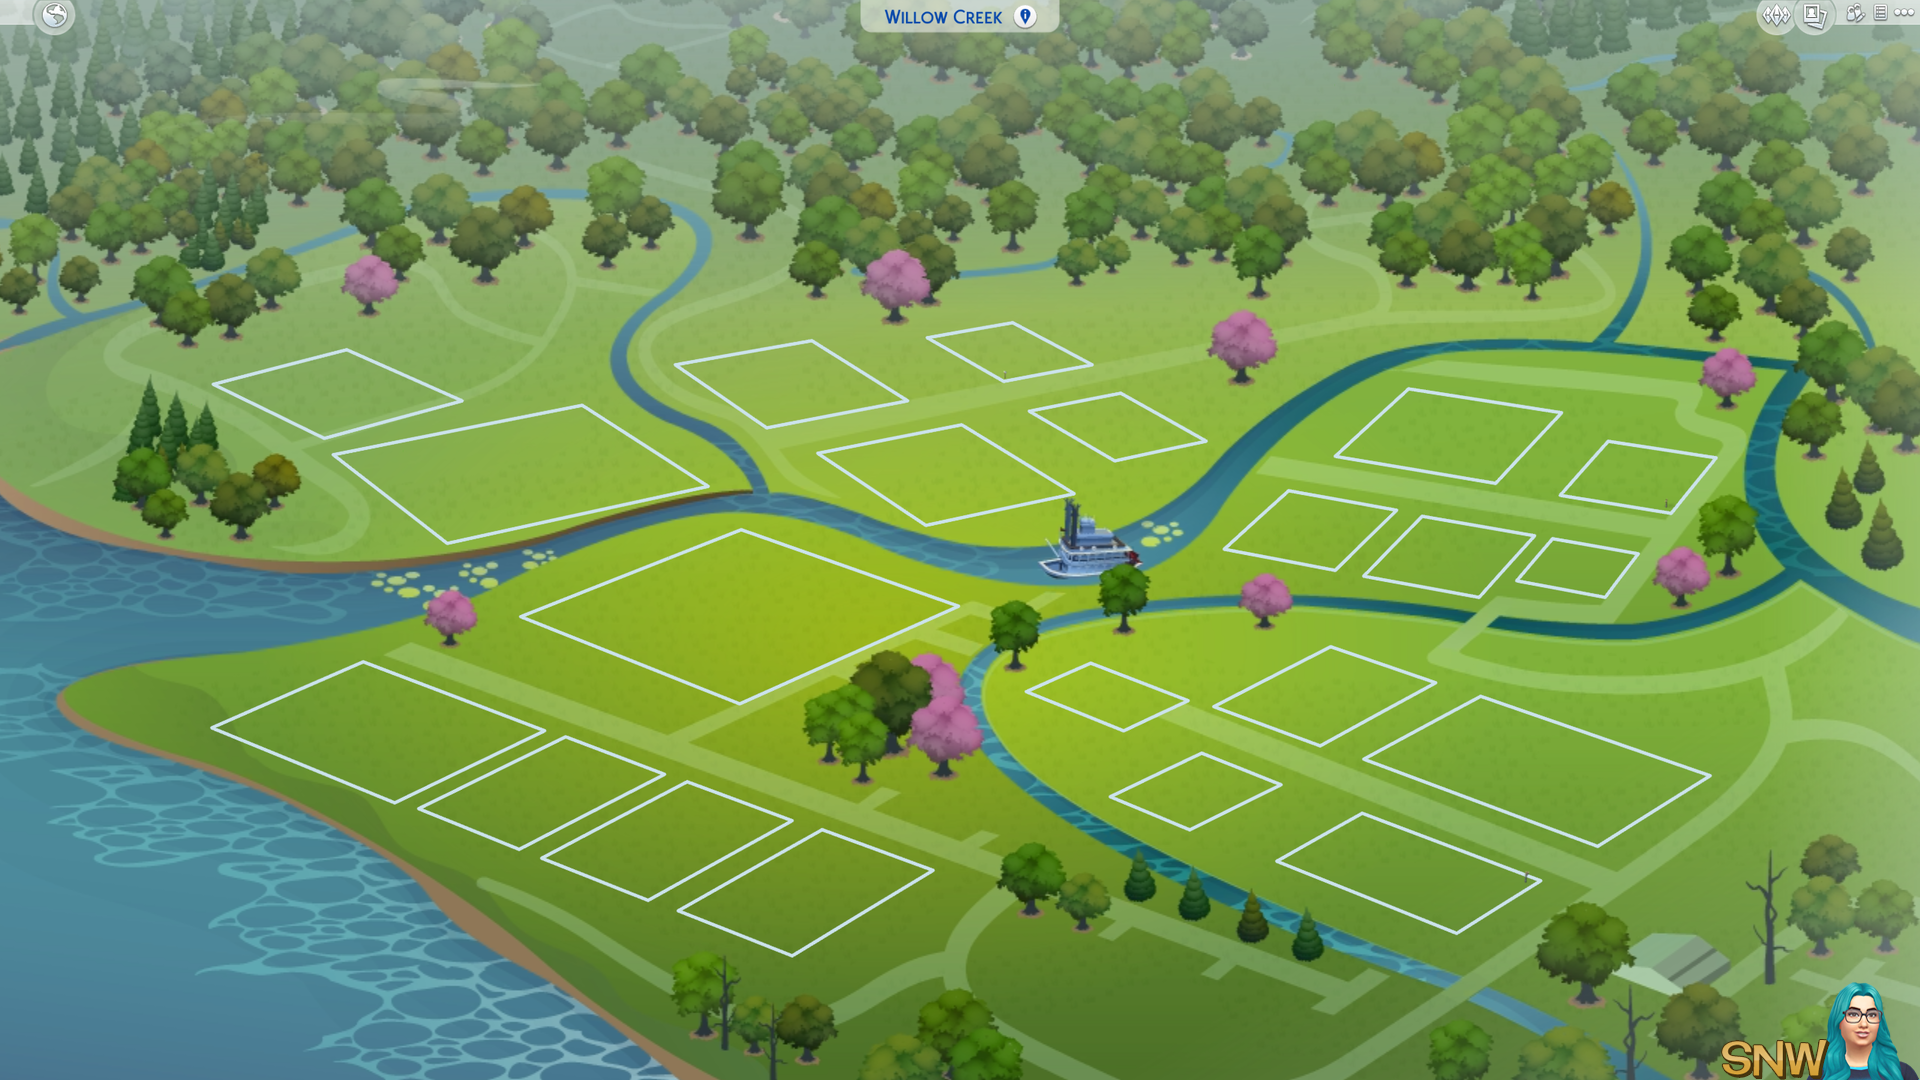 The Sims 4: Willow Creek world (empty)